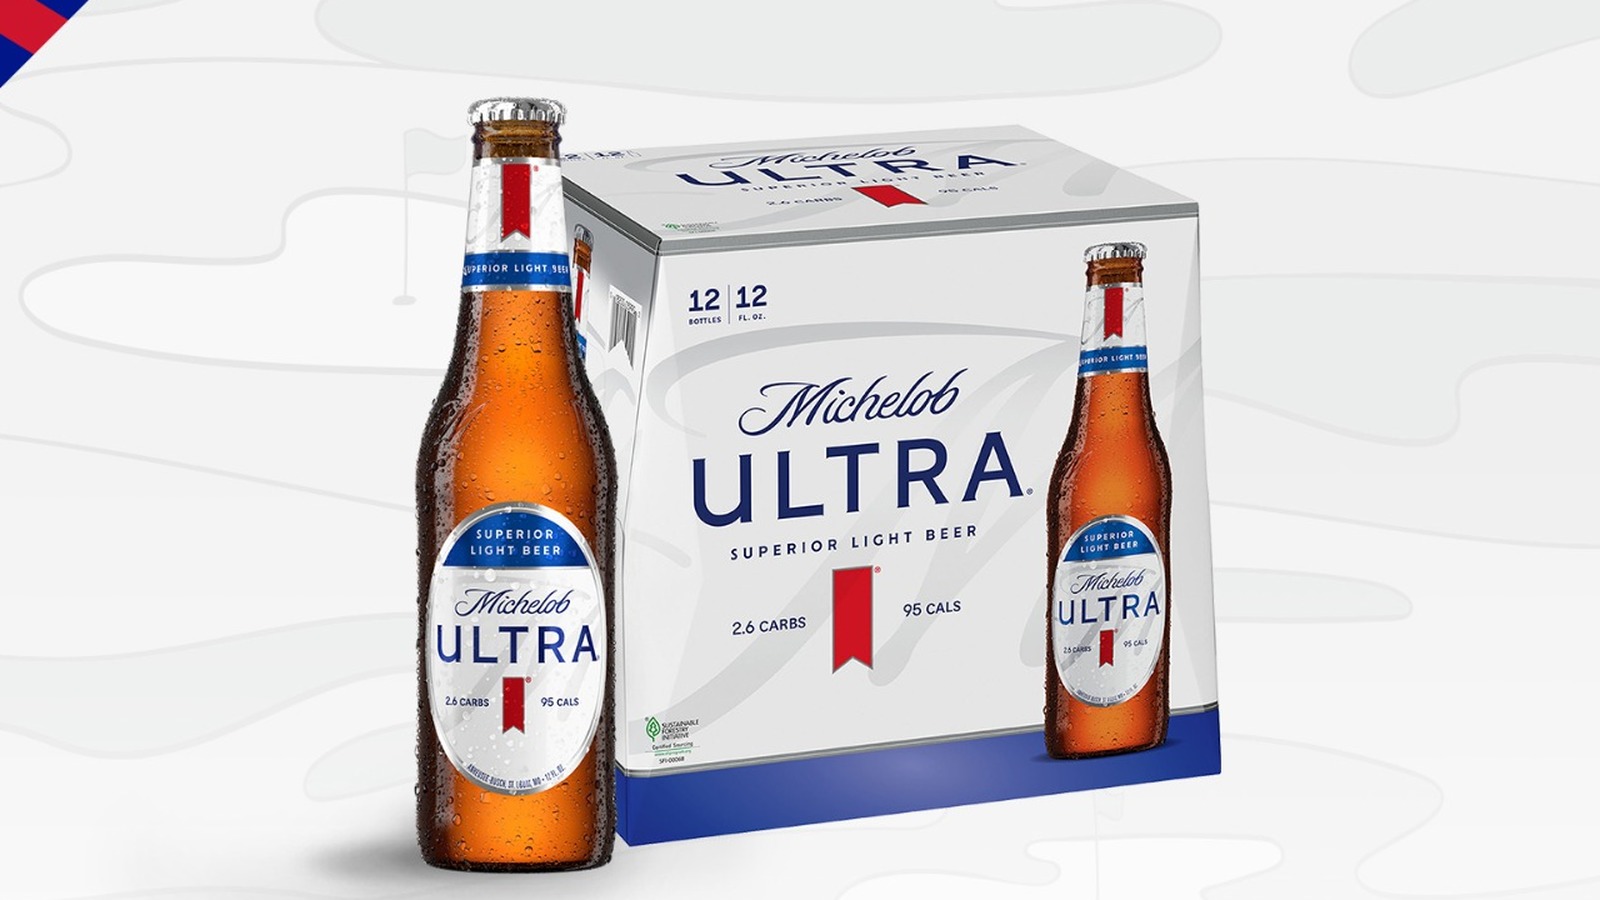 calories-in-busch-light-vs-michelob-ultra-shelly-lighting